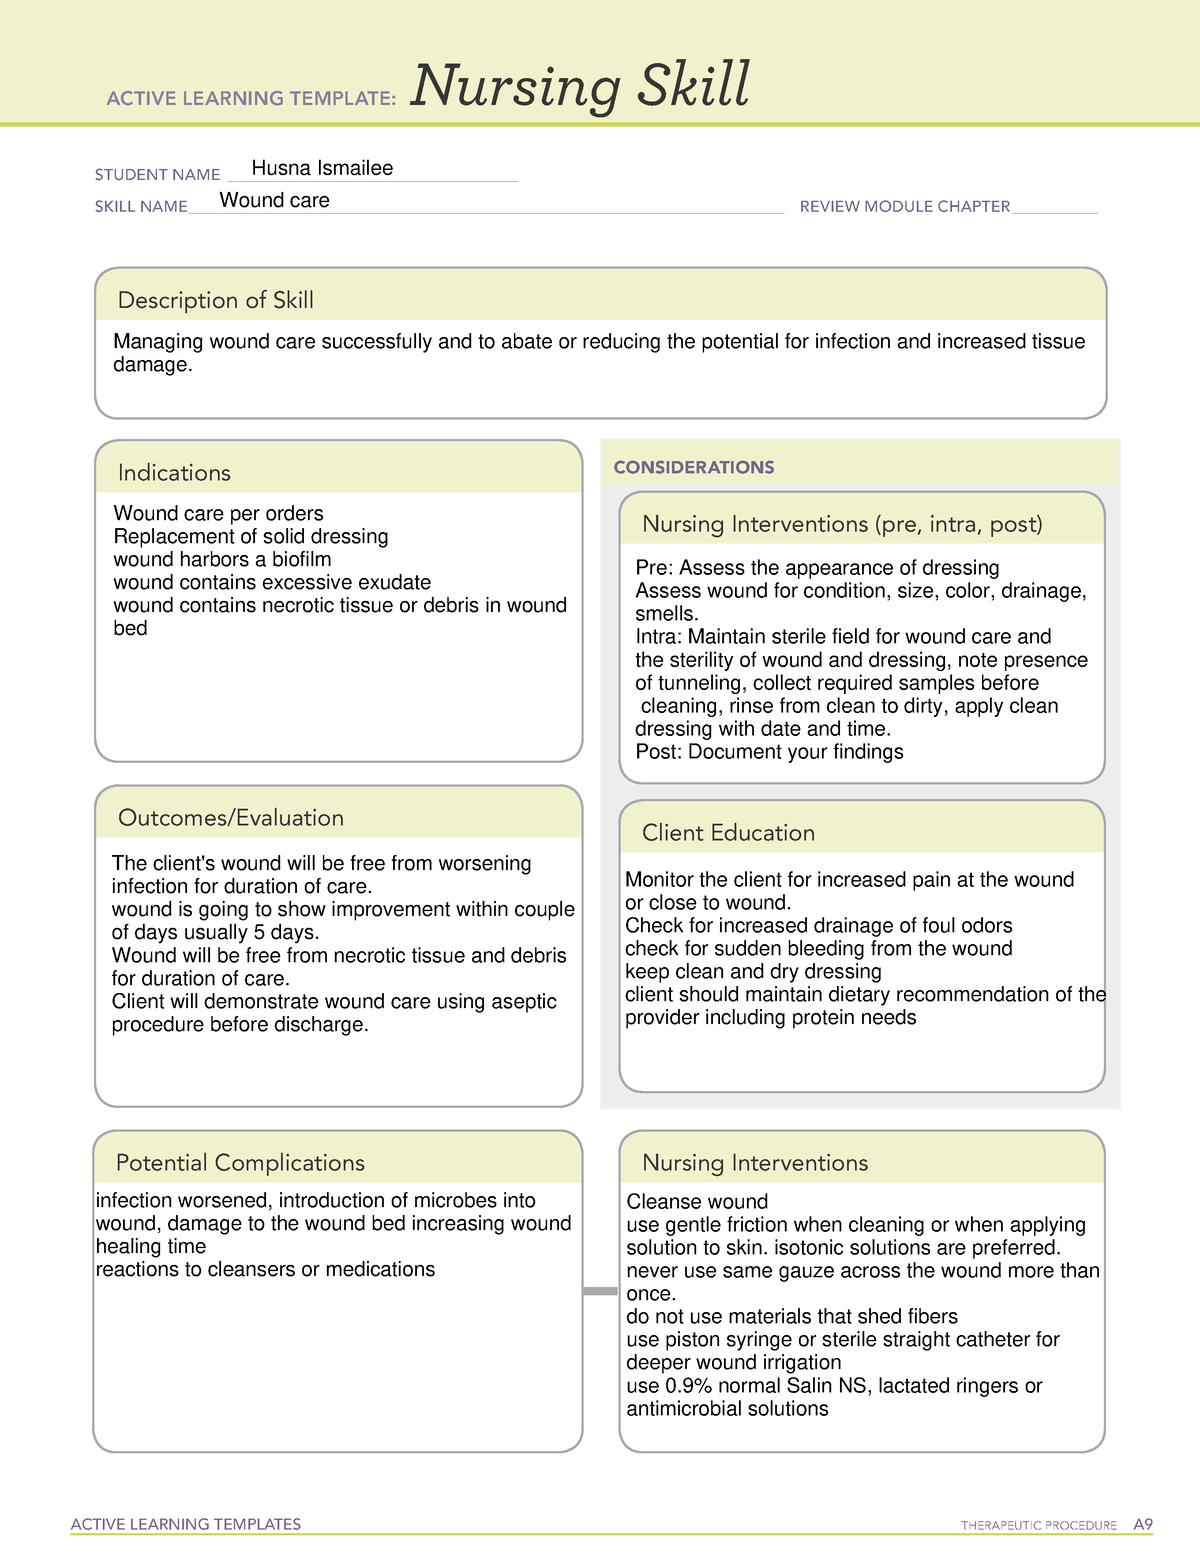 Active Learning Template Nursing Skill wound ACTIVE LEARNING